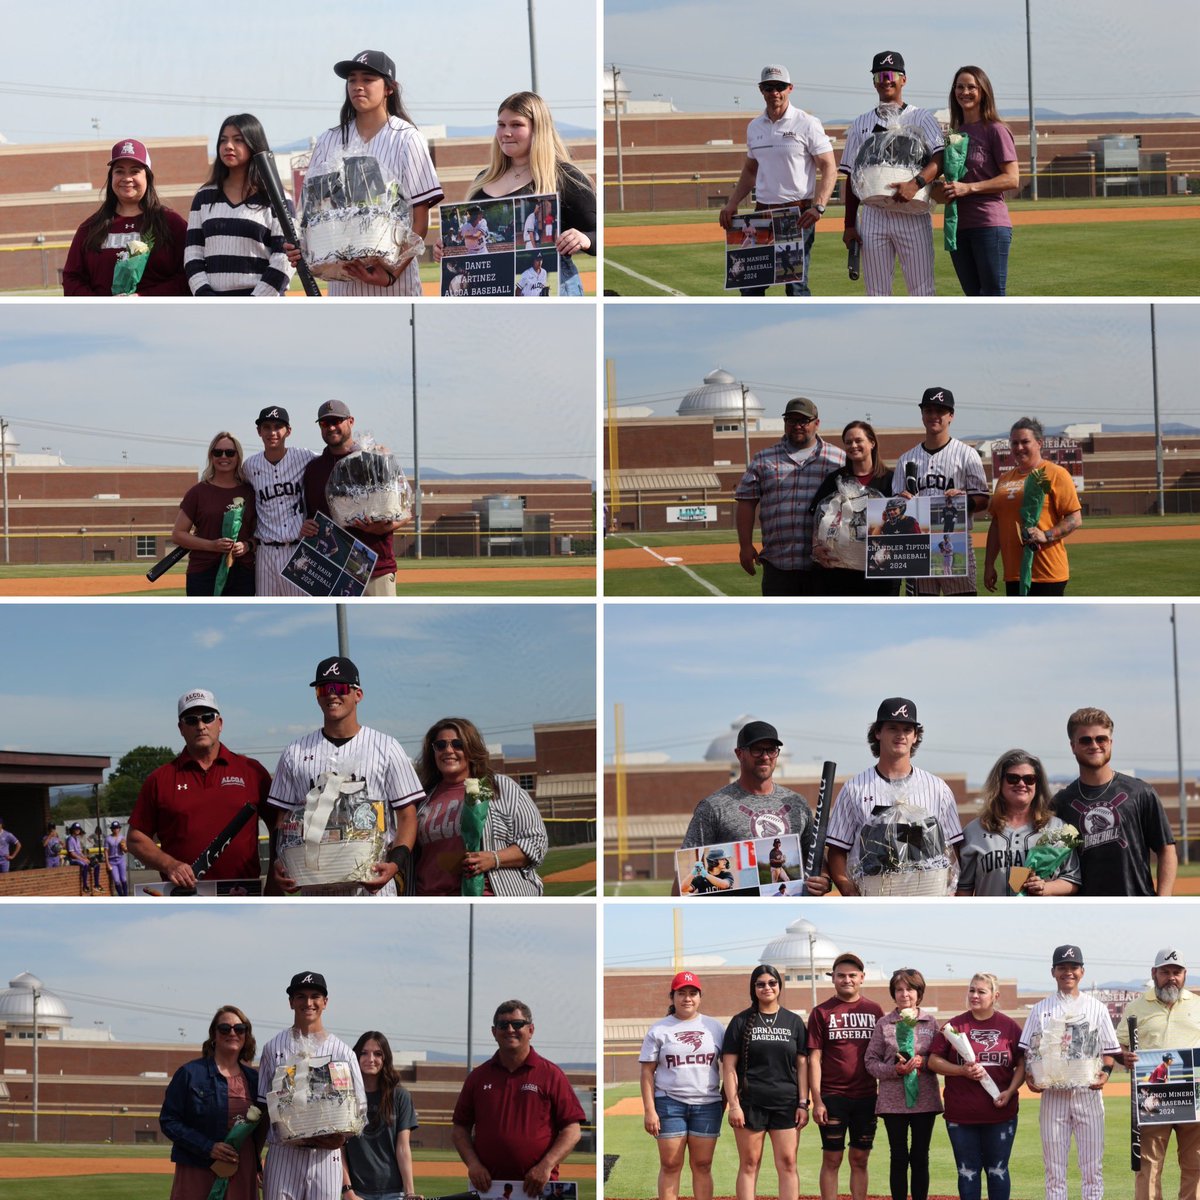 Last week the seniors of @alcoa_baseball were celebrated and thanks to Bri Hayes photography we have some incredible photos from that day! Join us as we share those with you today and thank these young men for always leaving it all out on the field! #TooHype 🌪⚾️ 📸